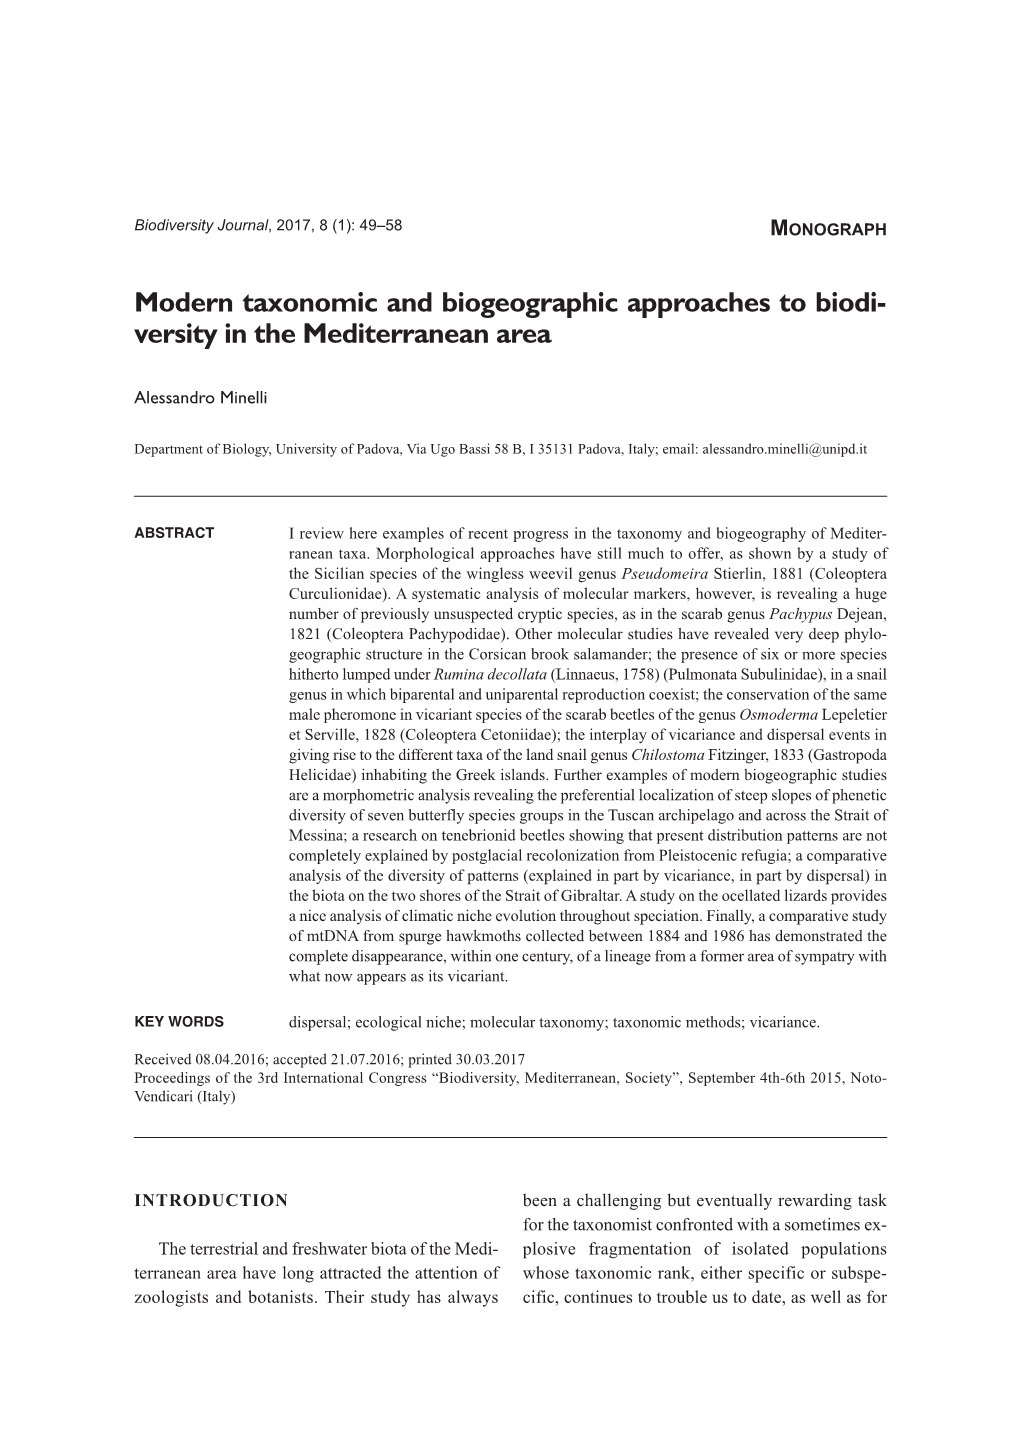 Modern Taxonomic and Biogeographic Approaches to Biodi - Versity in the Mediterranean Area